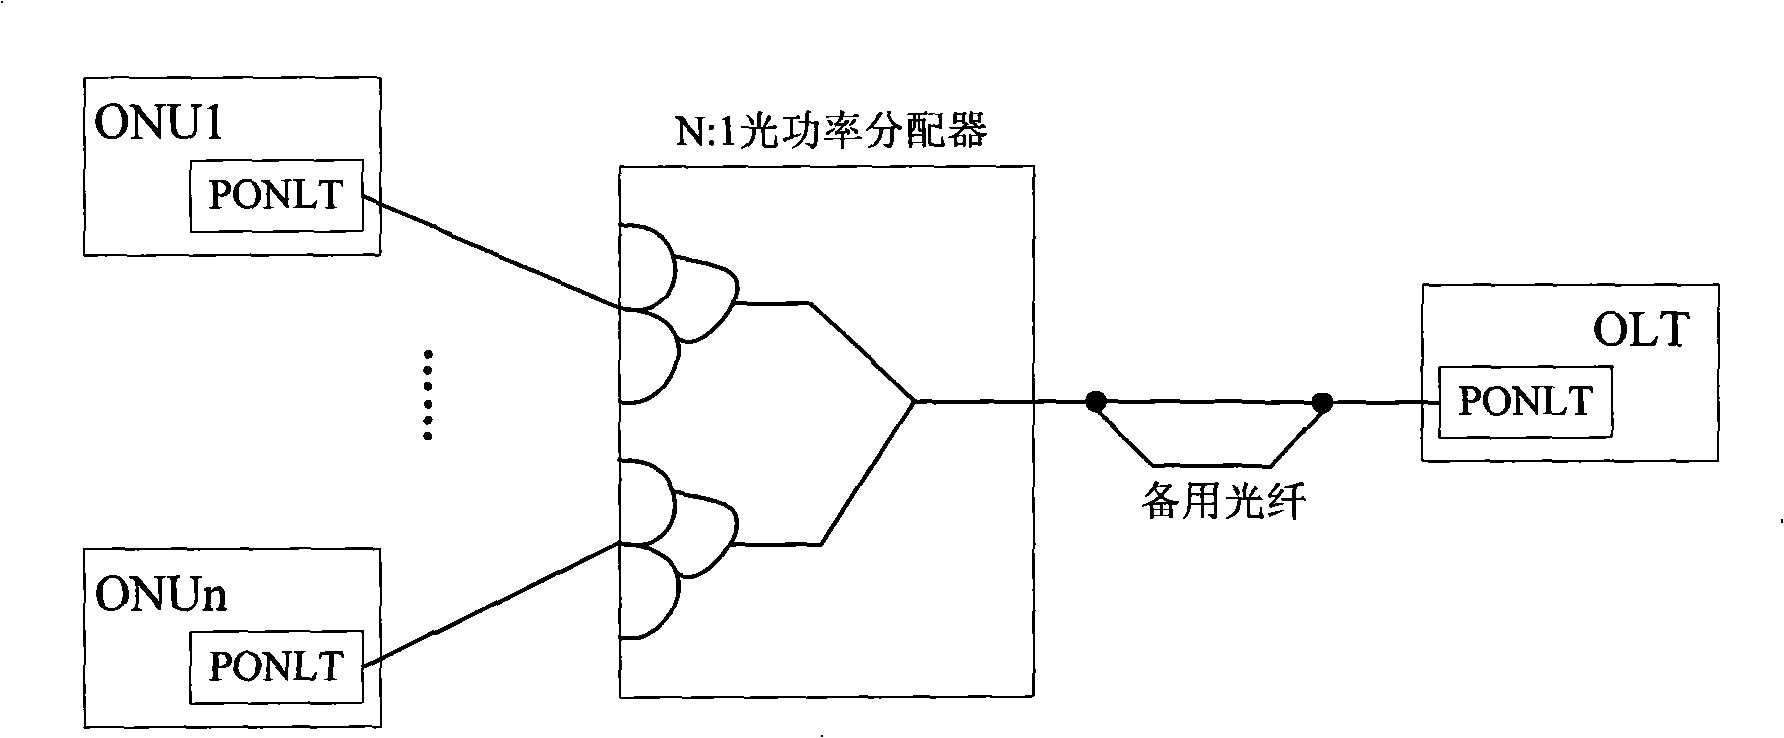 Protection switching method, system and equipment based on Ethernet passive optical network